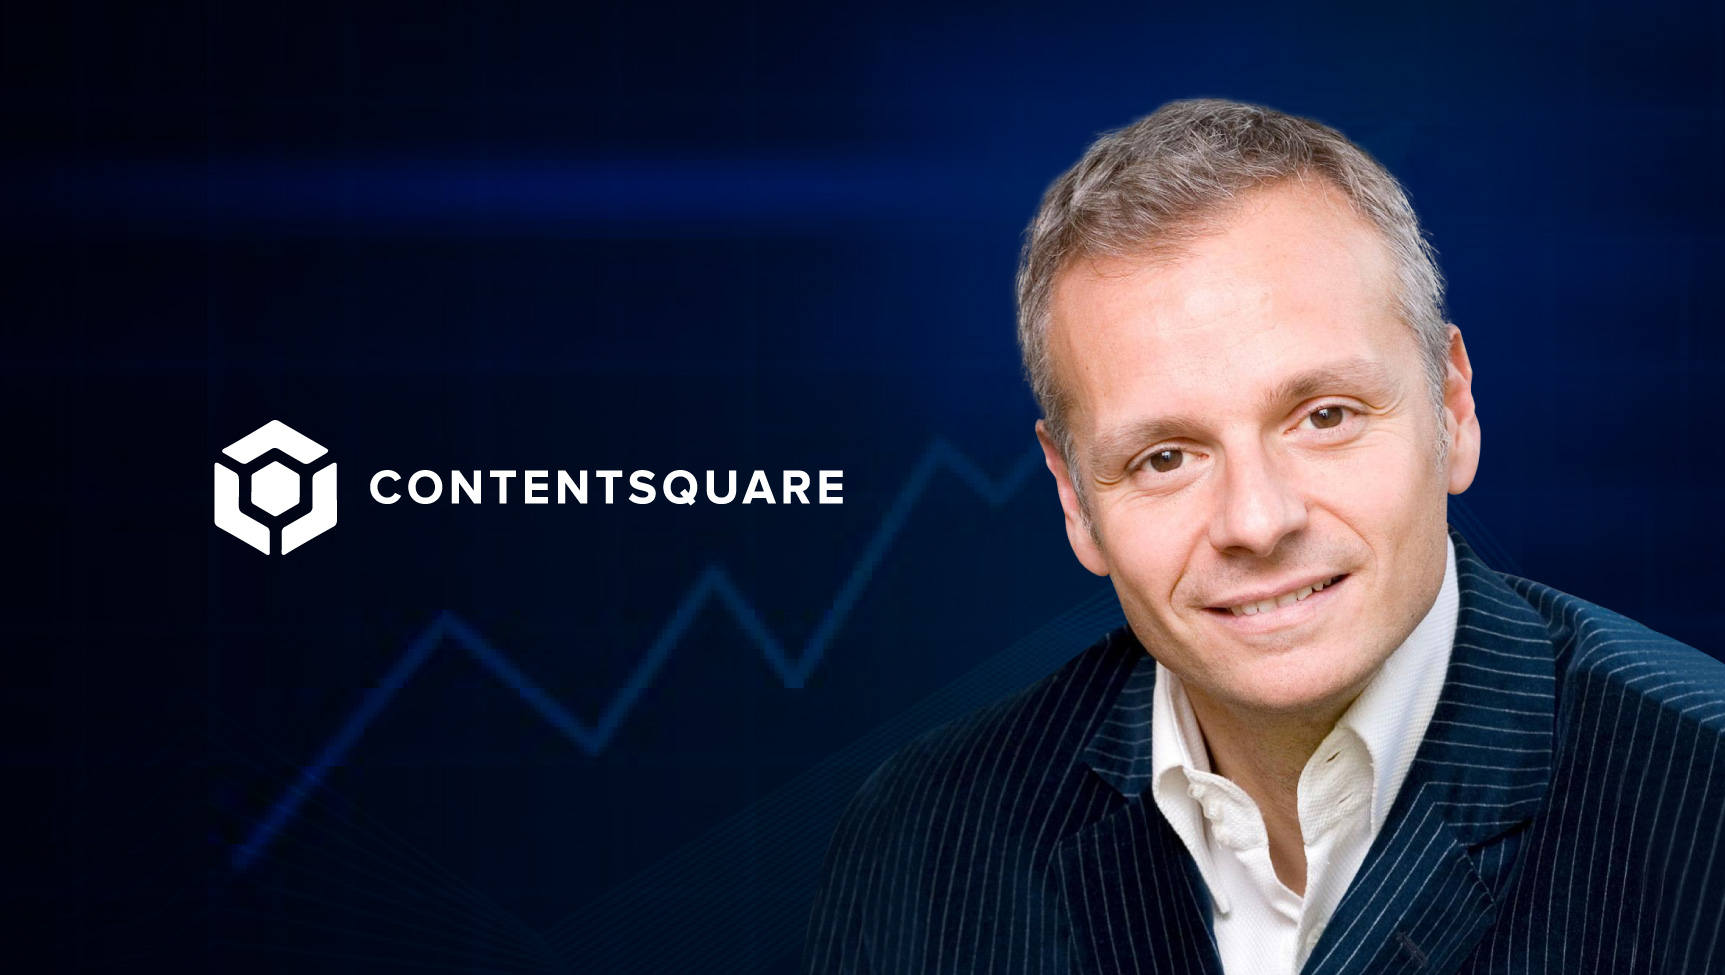 SalesTech Interview with Jean-Marc Bellaiche, Chief Strategy & Partnership Officer at Contentsquare